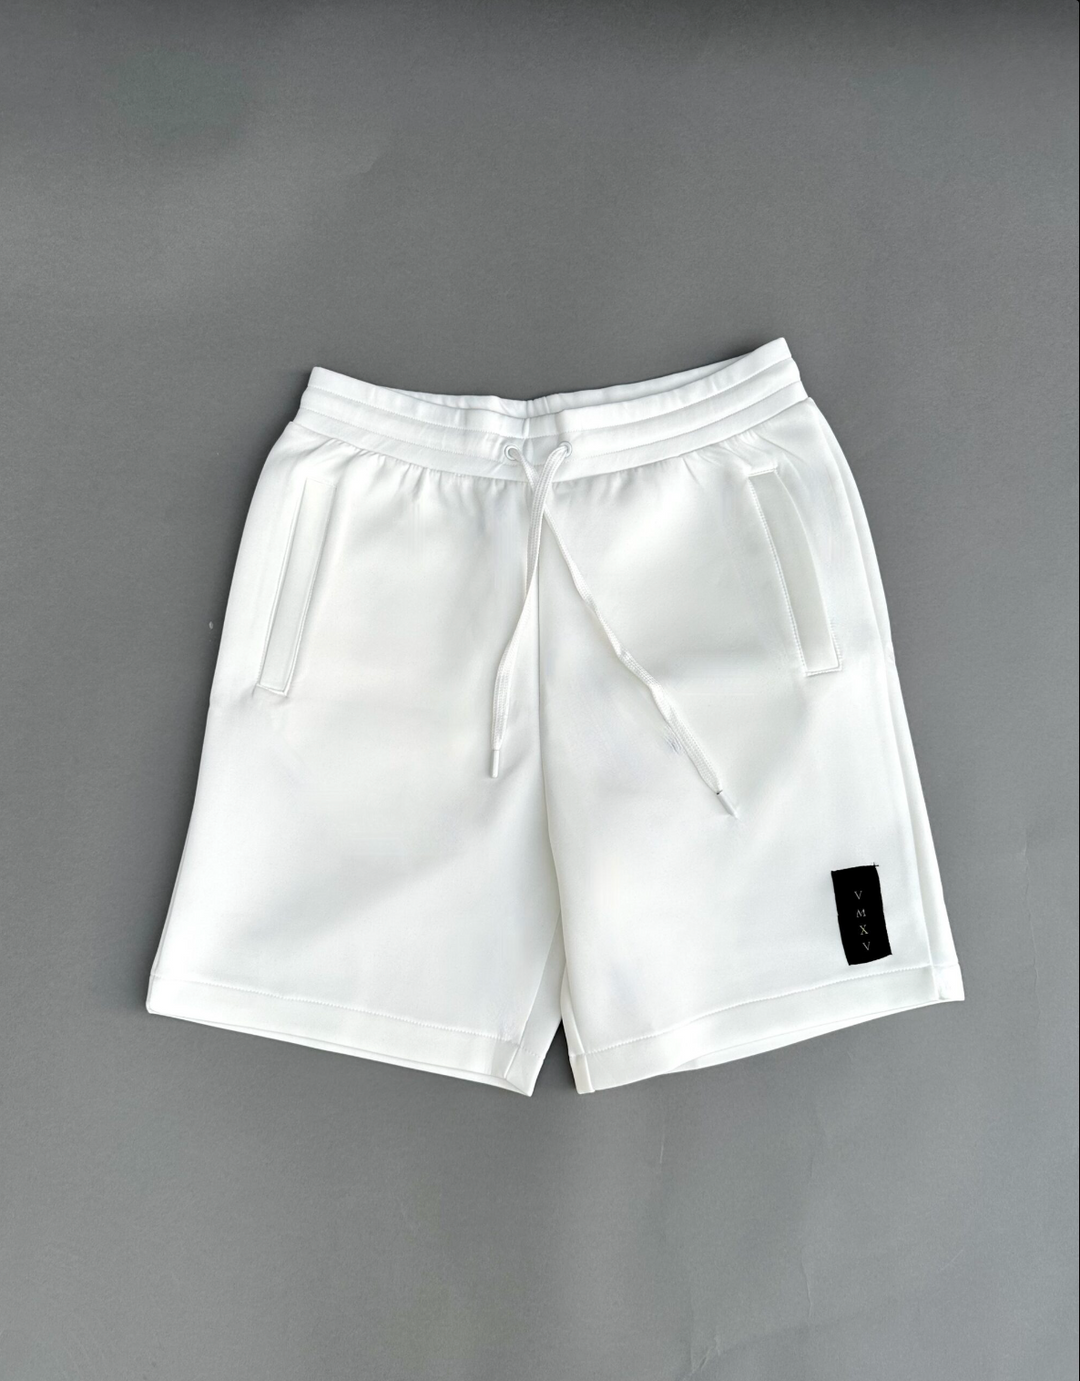 The Ripped Pocket White Shorts